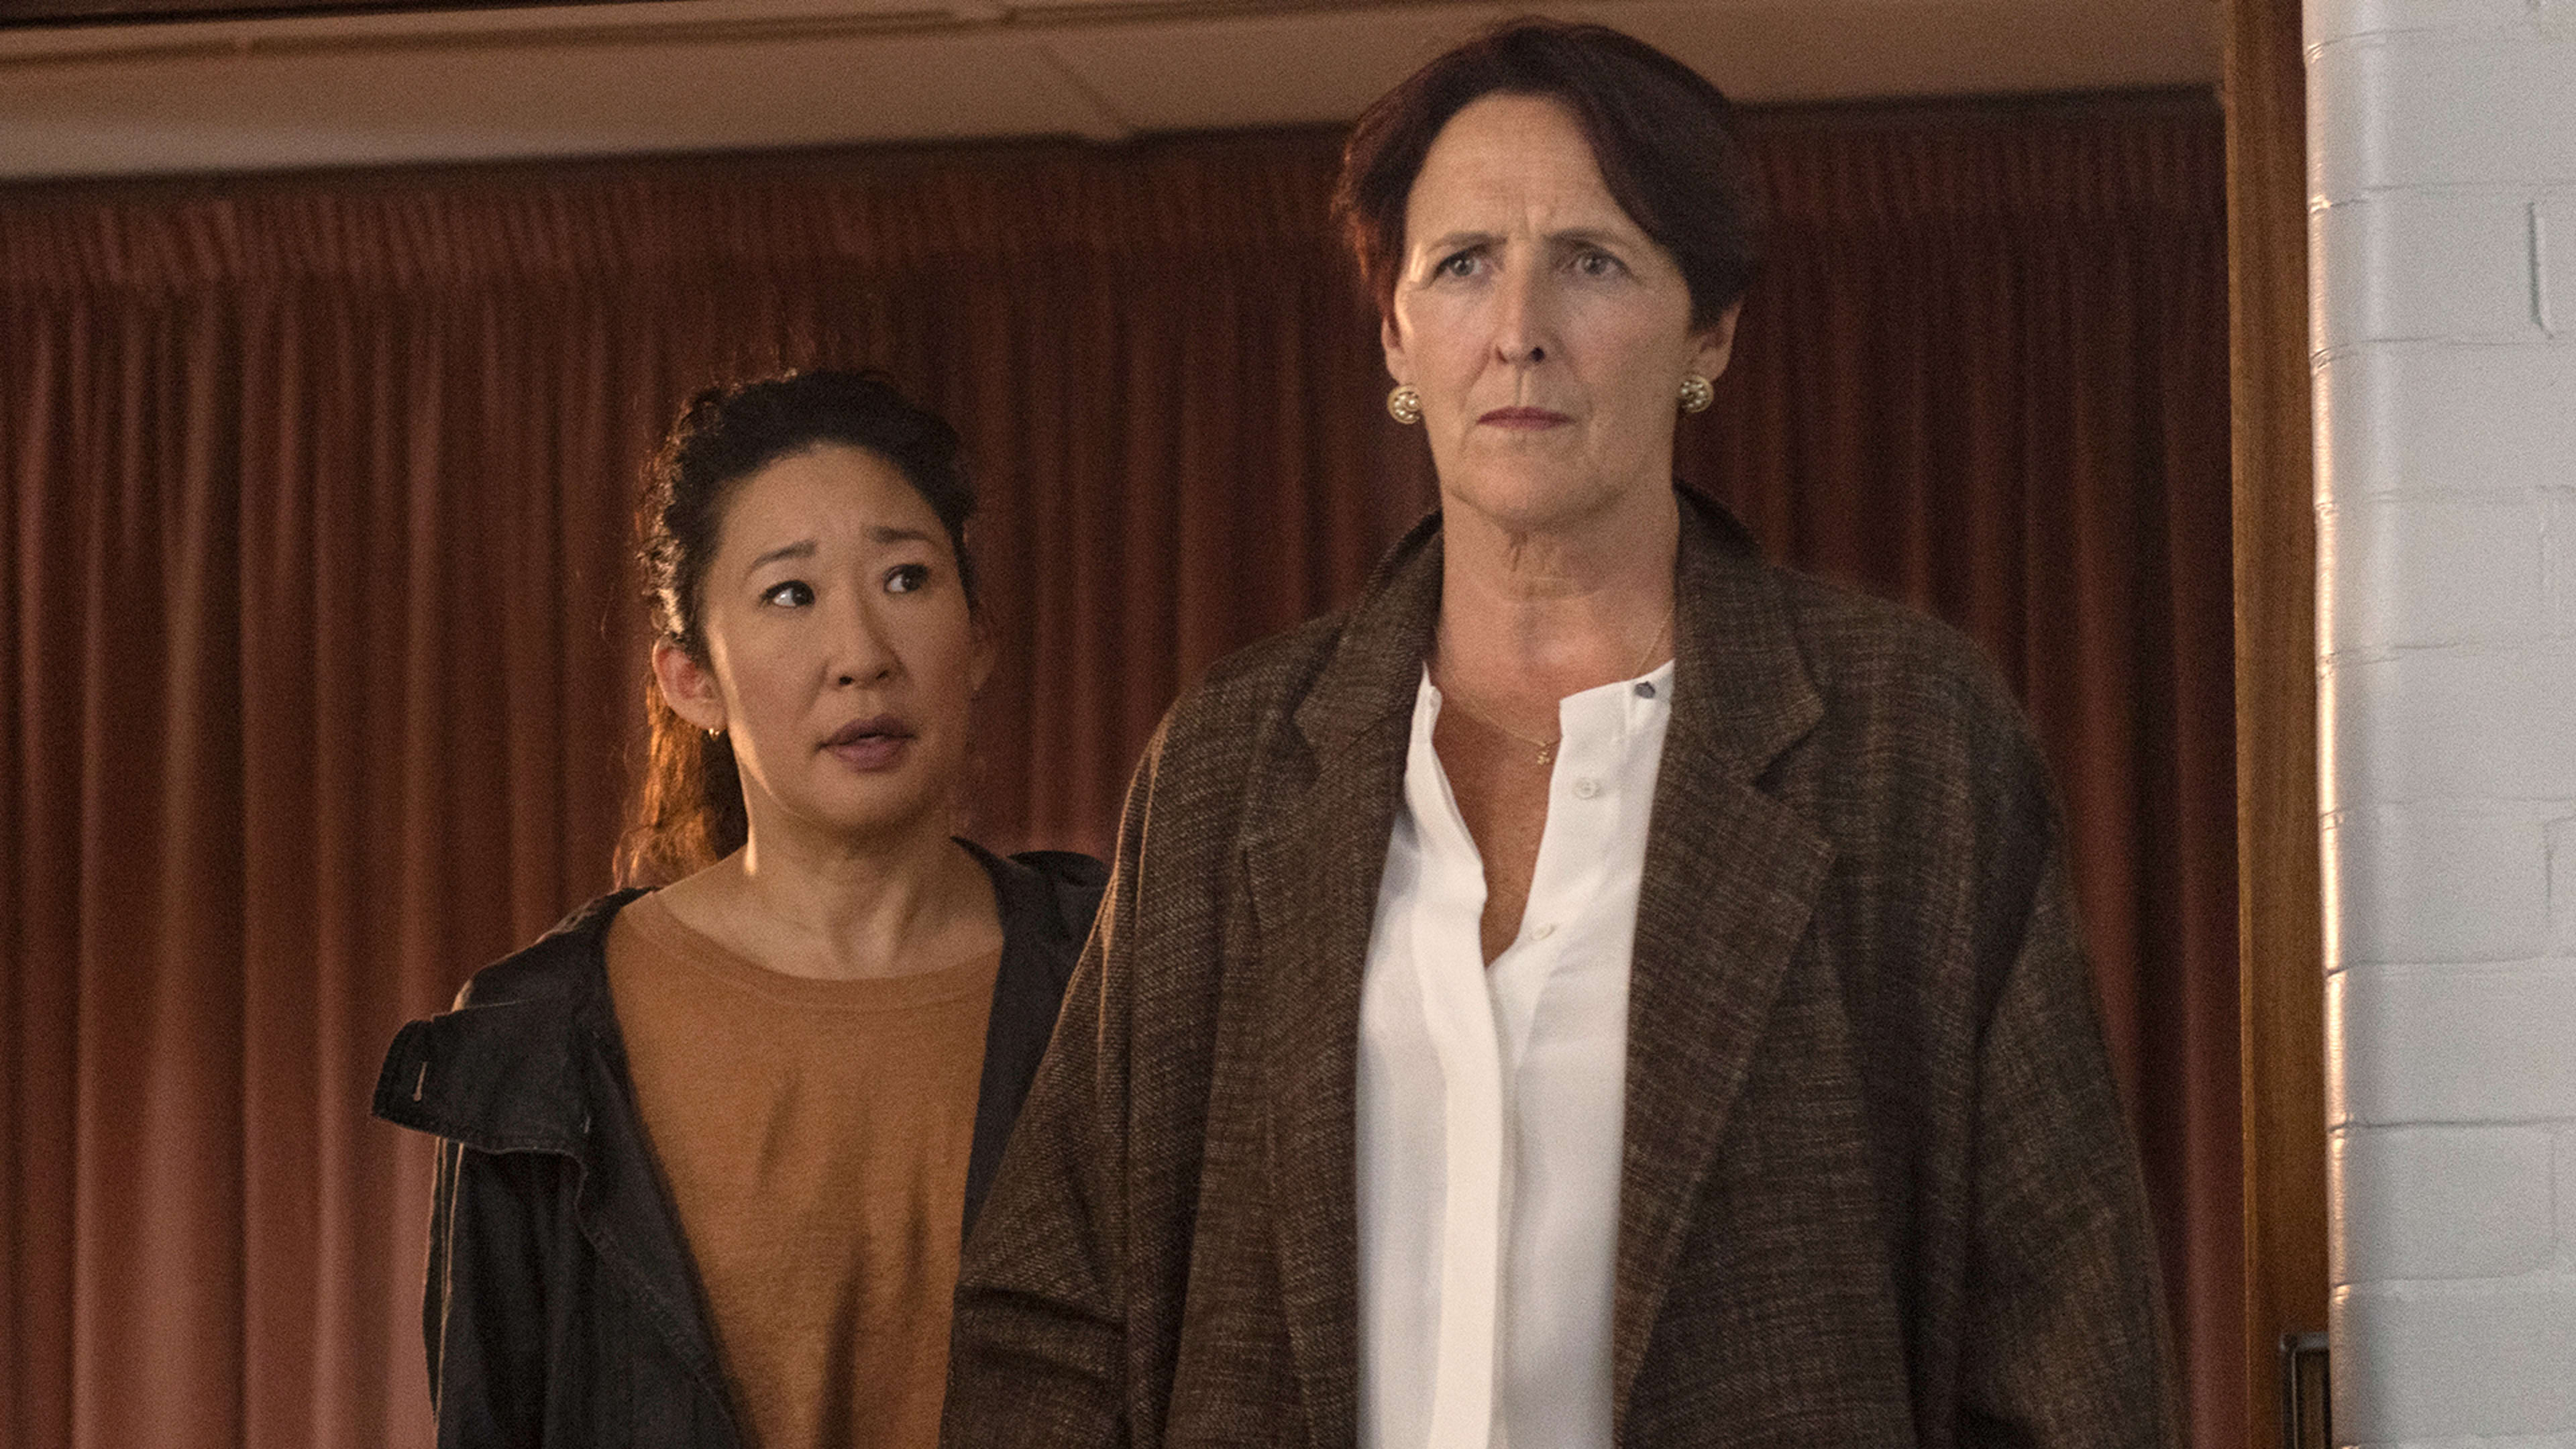 “Killing Eve” on Hulu is so good even Netflix wants you to watch it